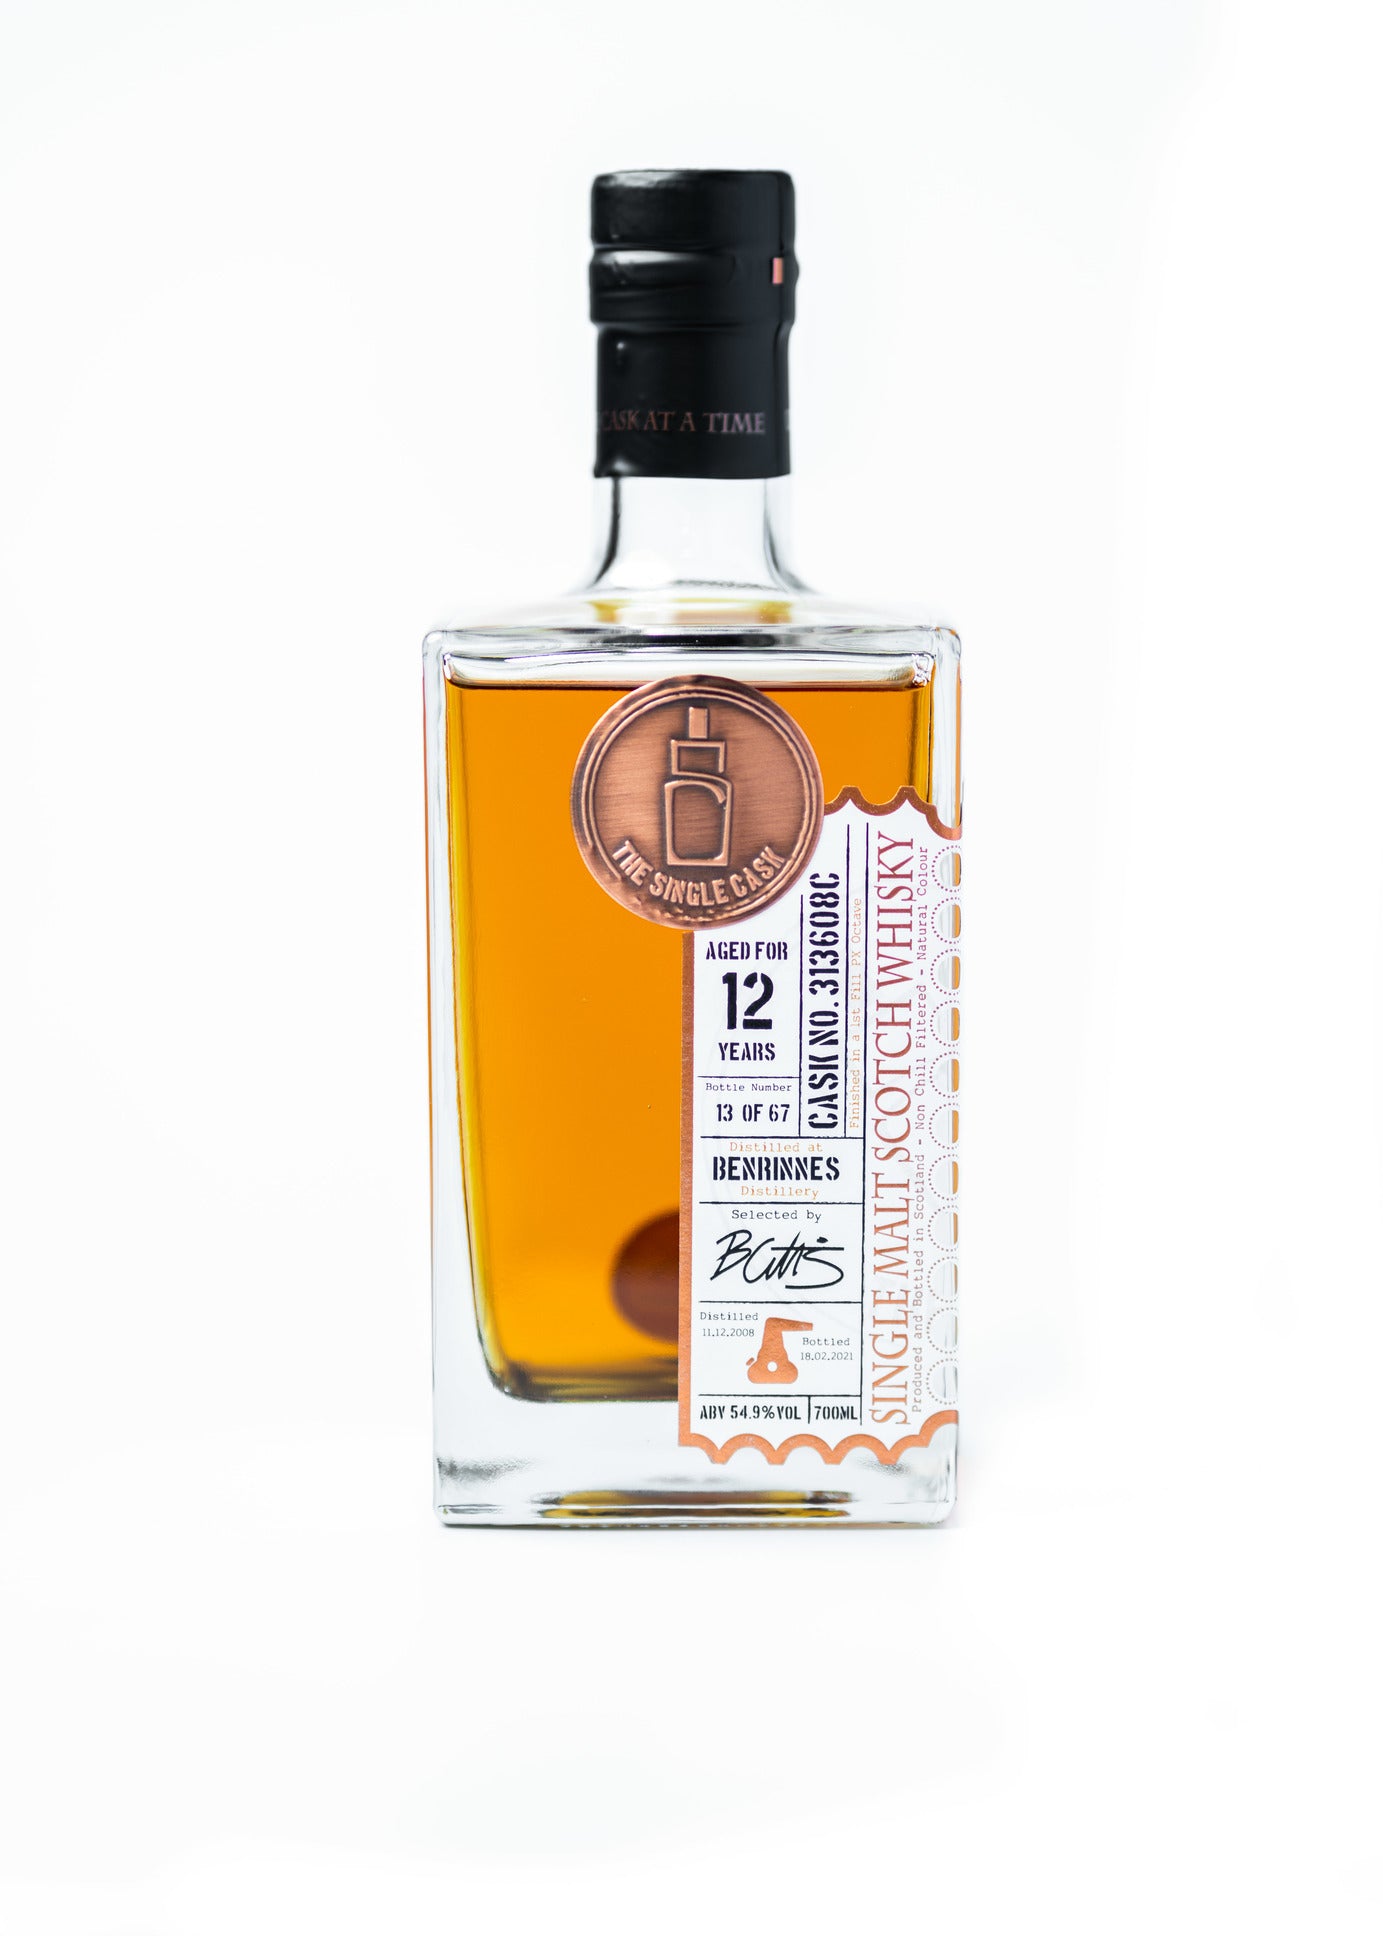 Benrinnes 12 years old scotch whisky by The Single Cask